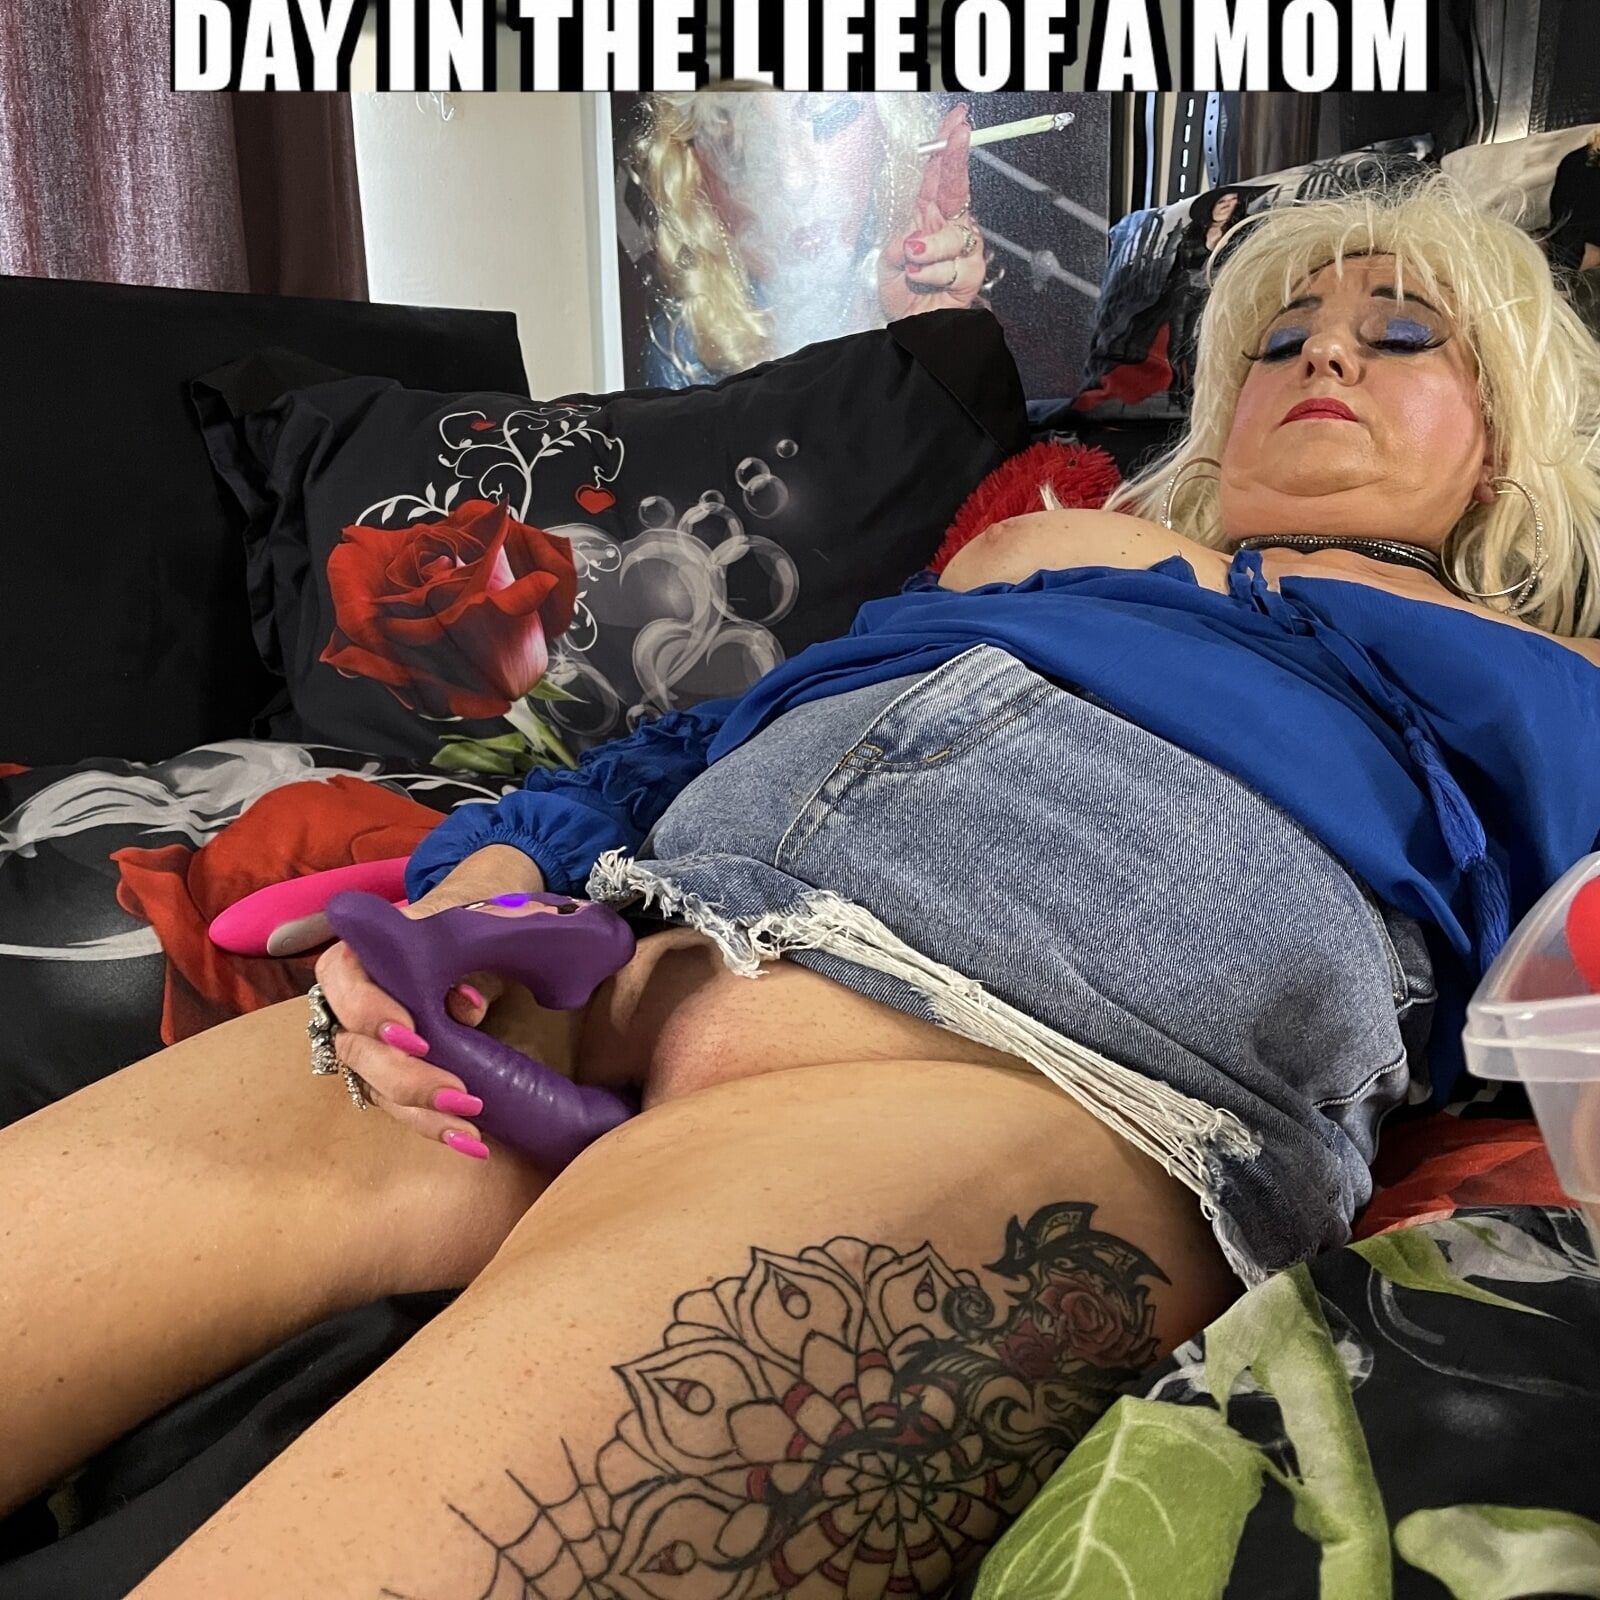 DAY IN THE LIFE OF A MOM SHIRLEY #43